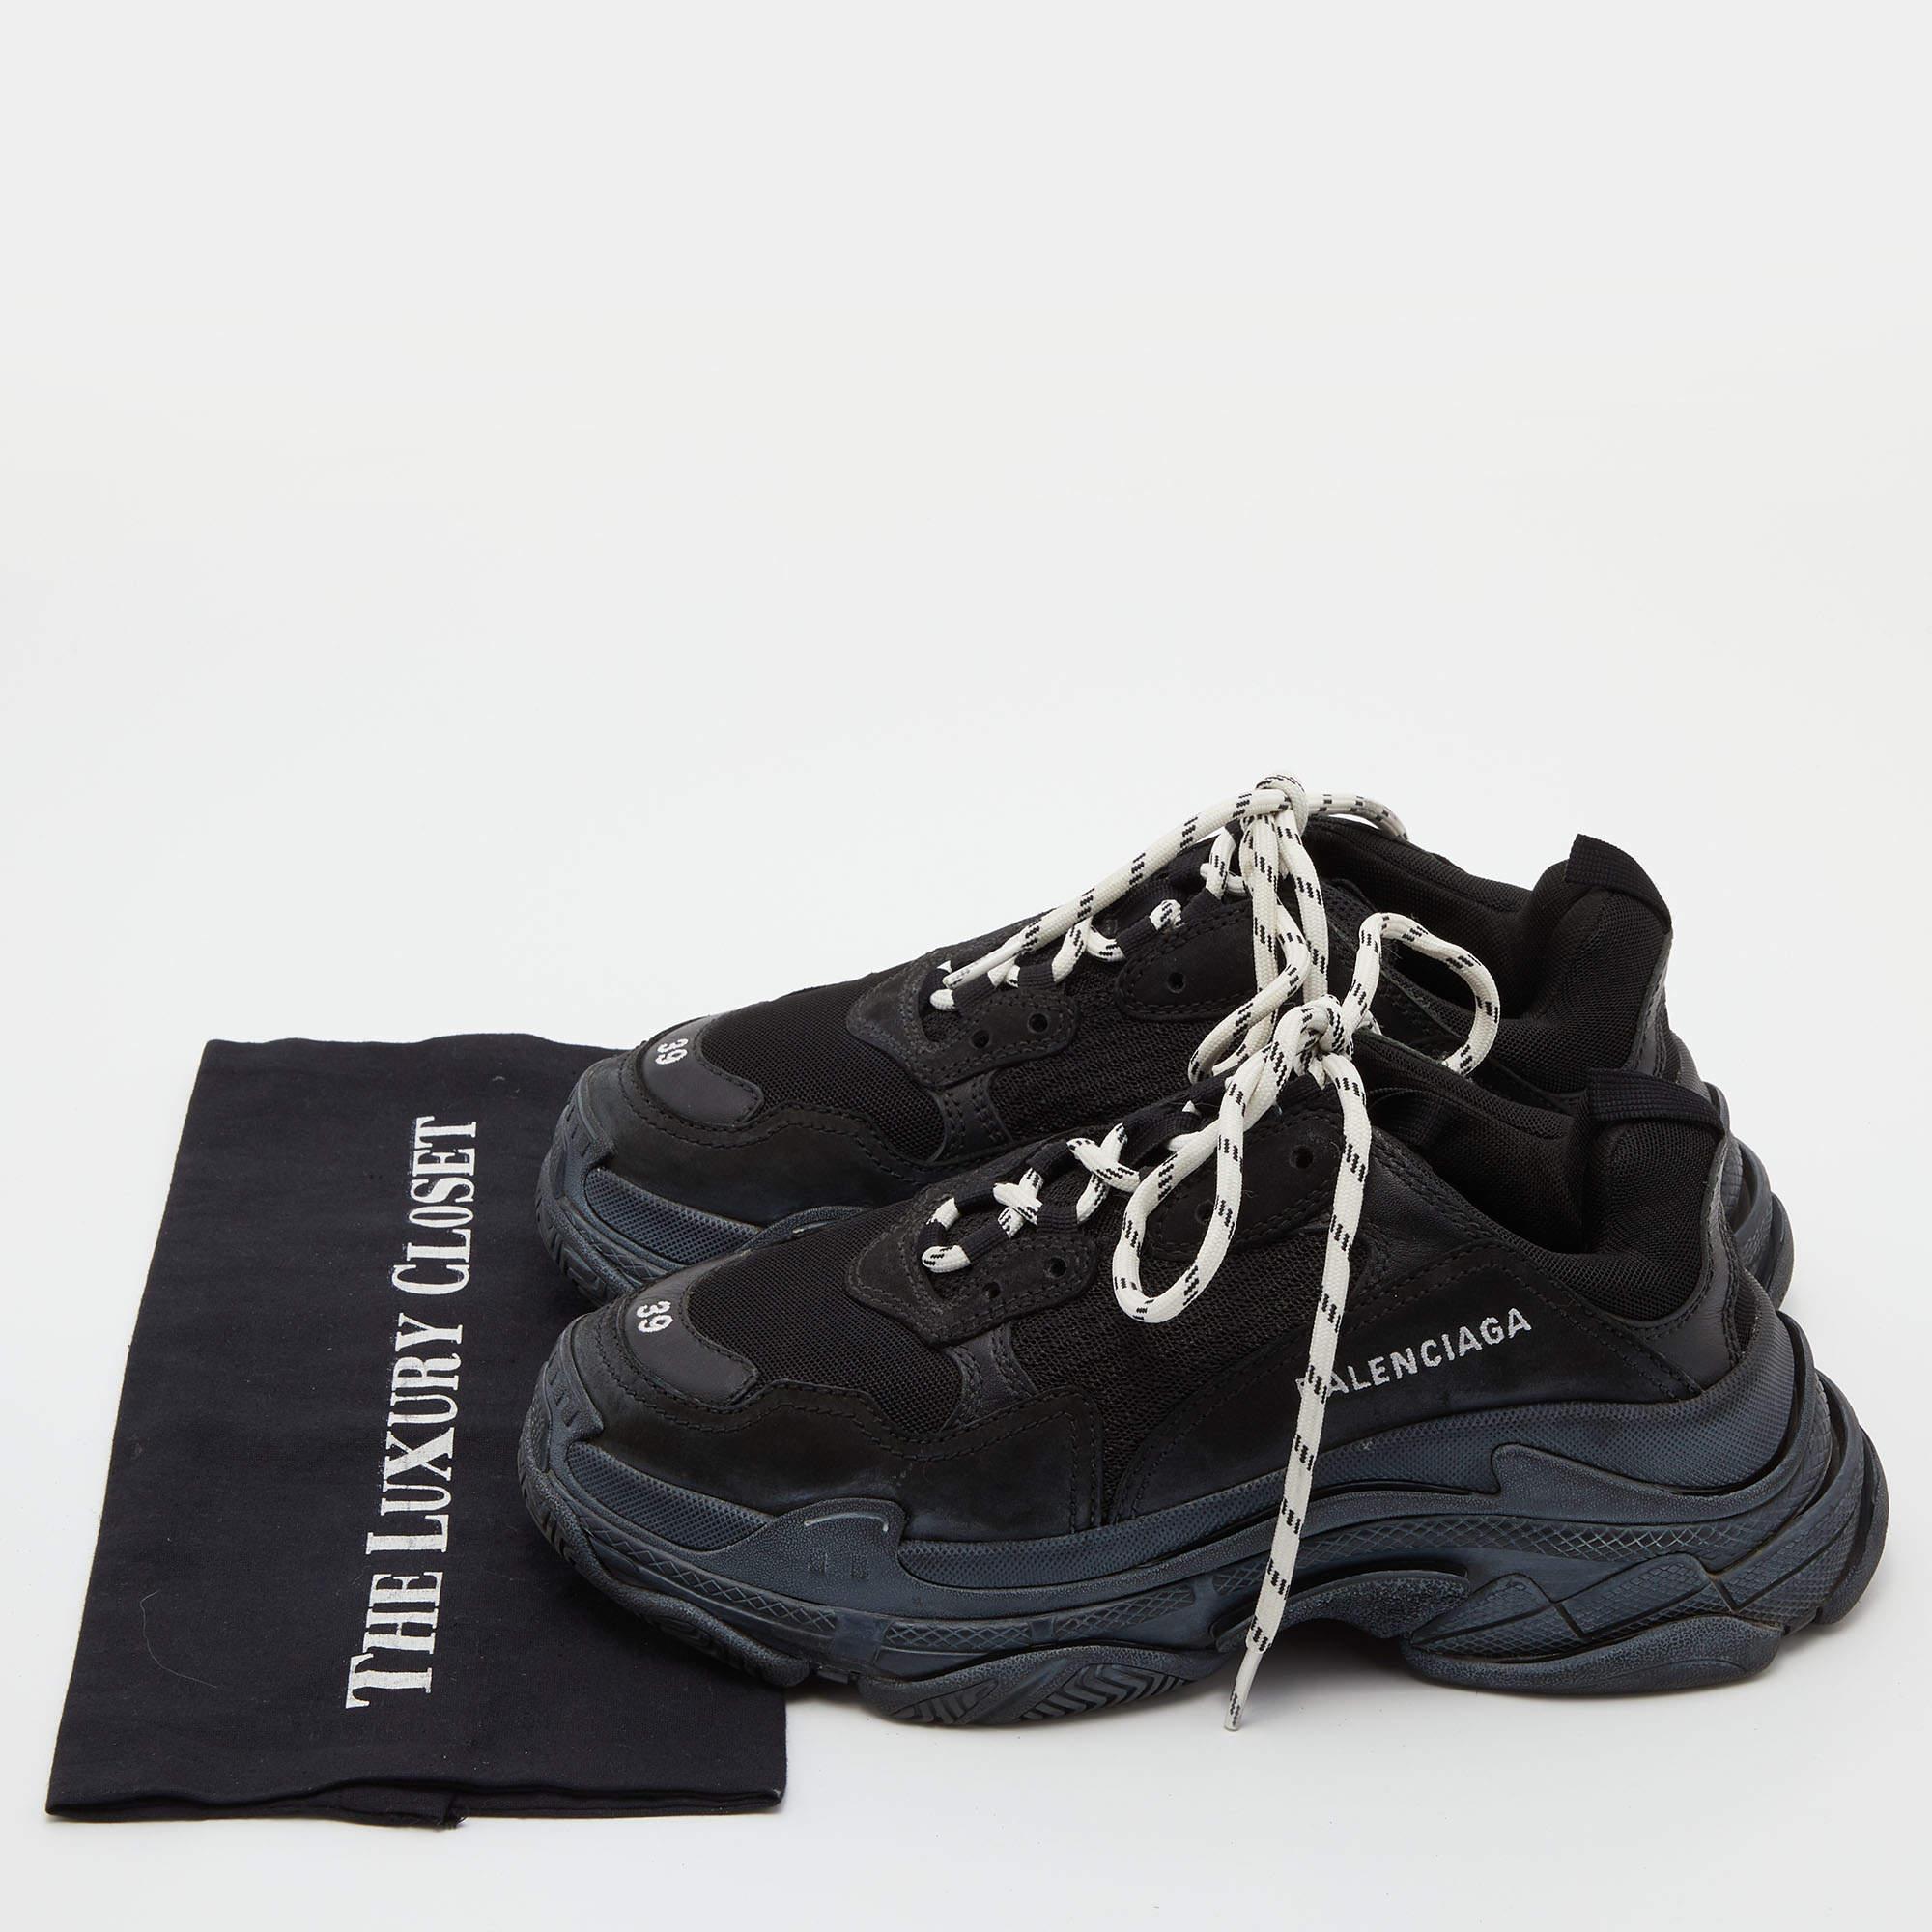 Balenciaga Black Mesh and Leather Triple S Sneakers Size 39 5